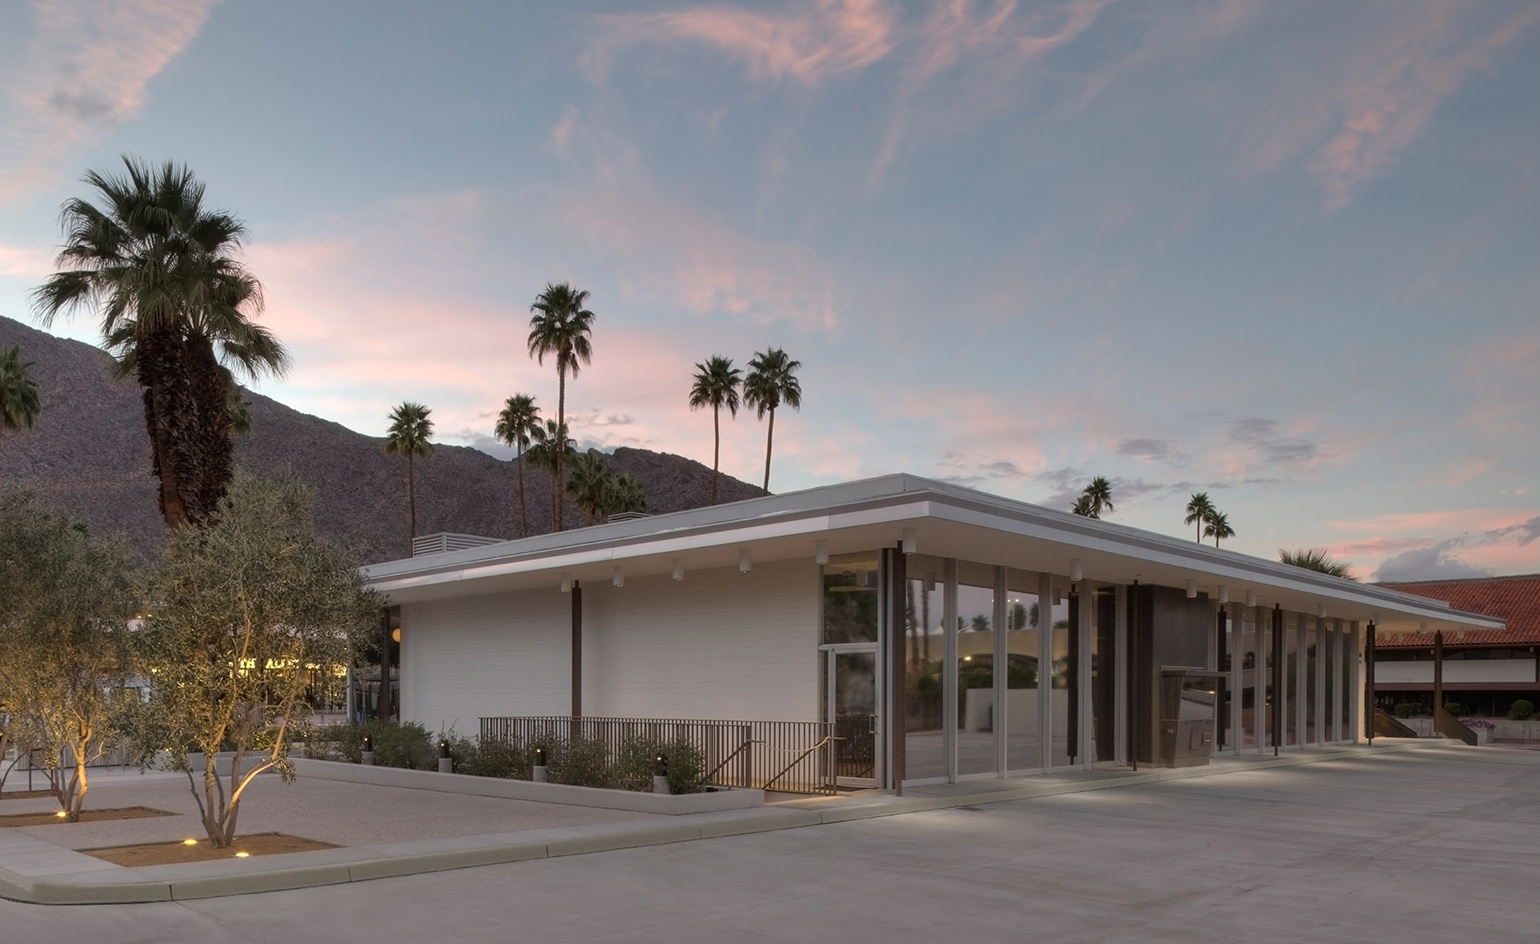 Architecture And Design Center Palm Springs Art Museum, - Palm Springs Architecture , HD Wallpaper & Backgrounds